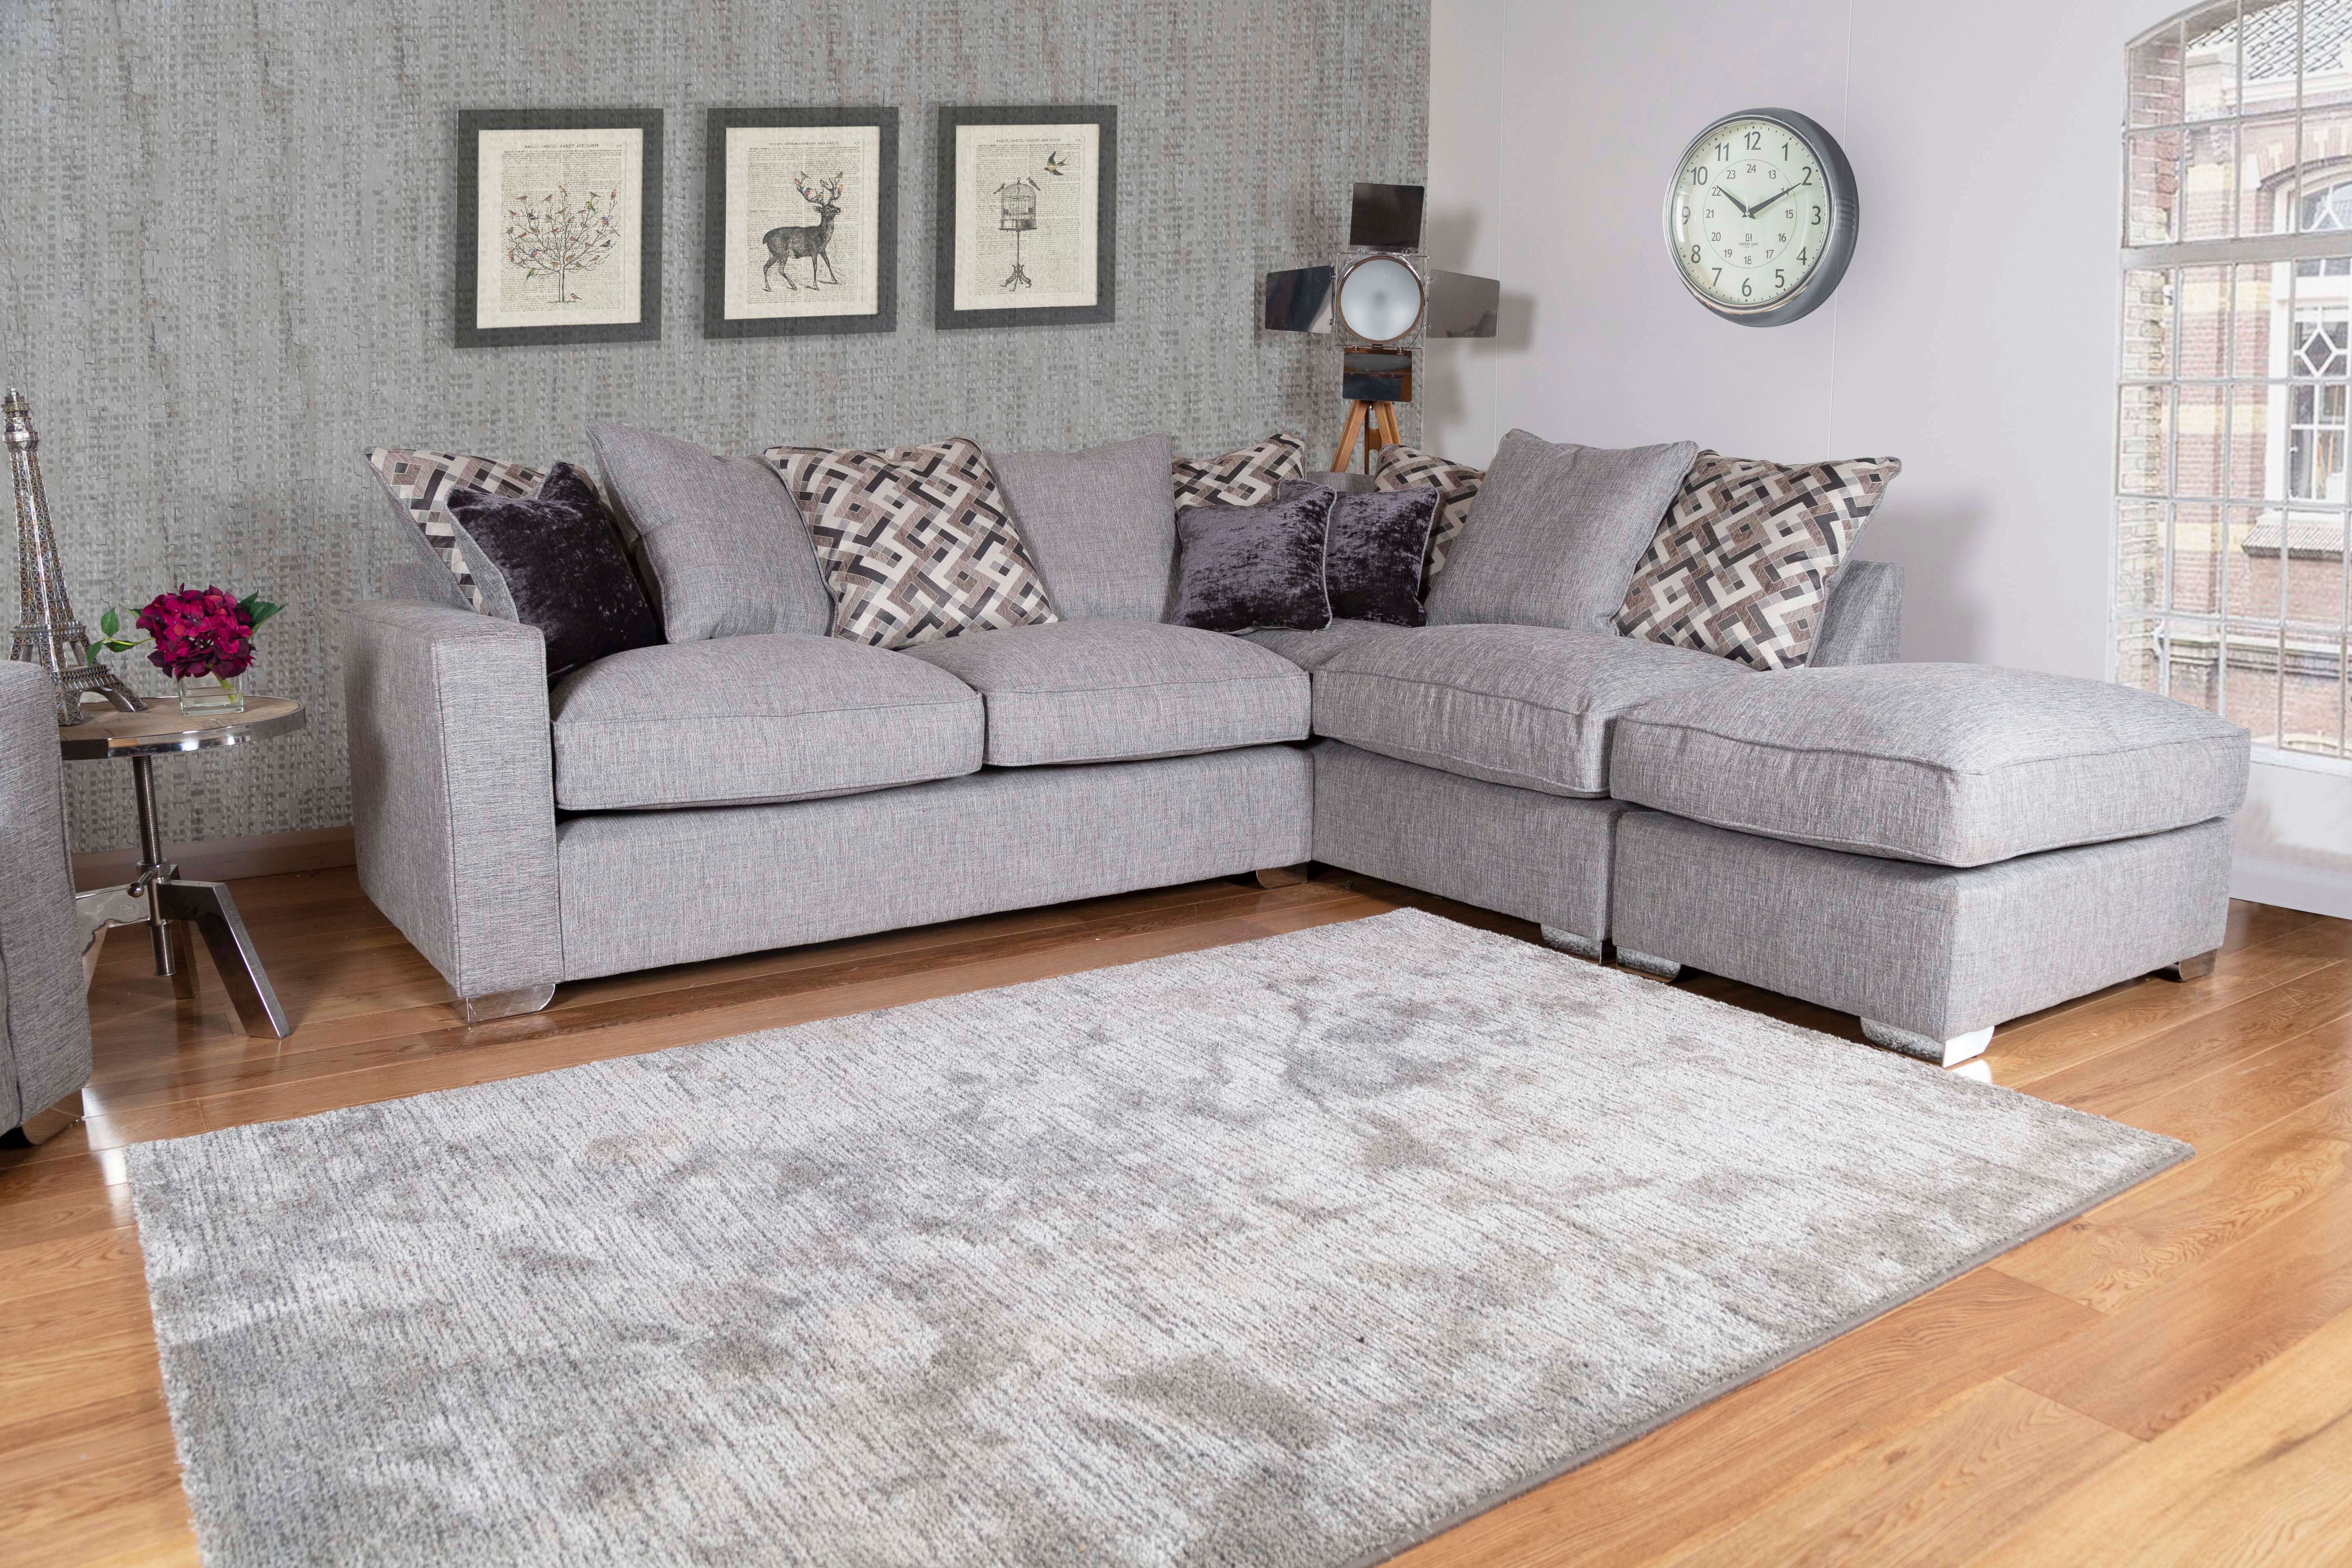 Showing image for Montpellier left chaise sofa bed + footstool